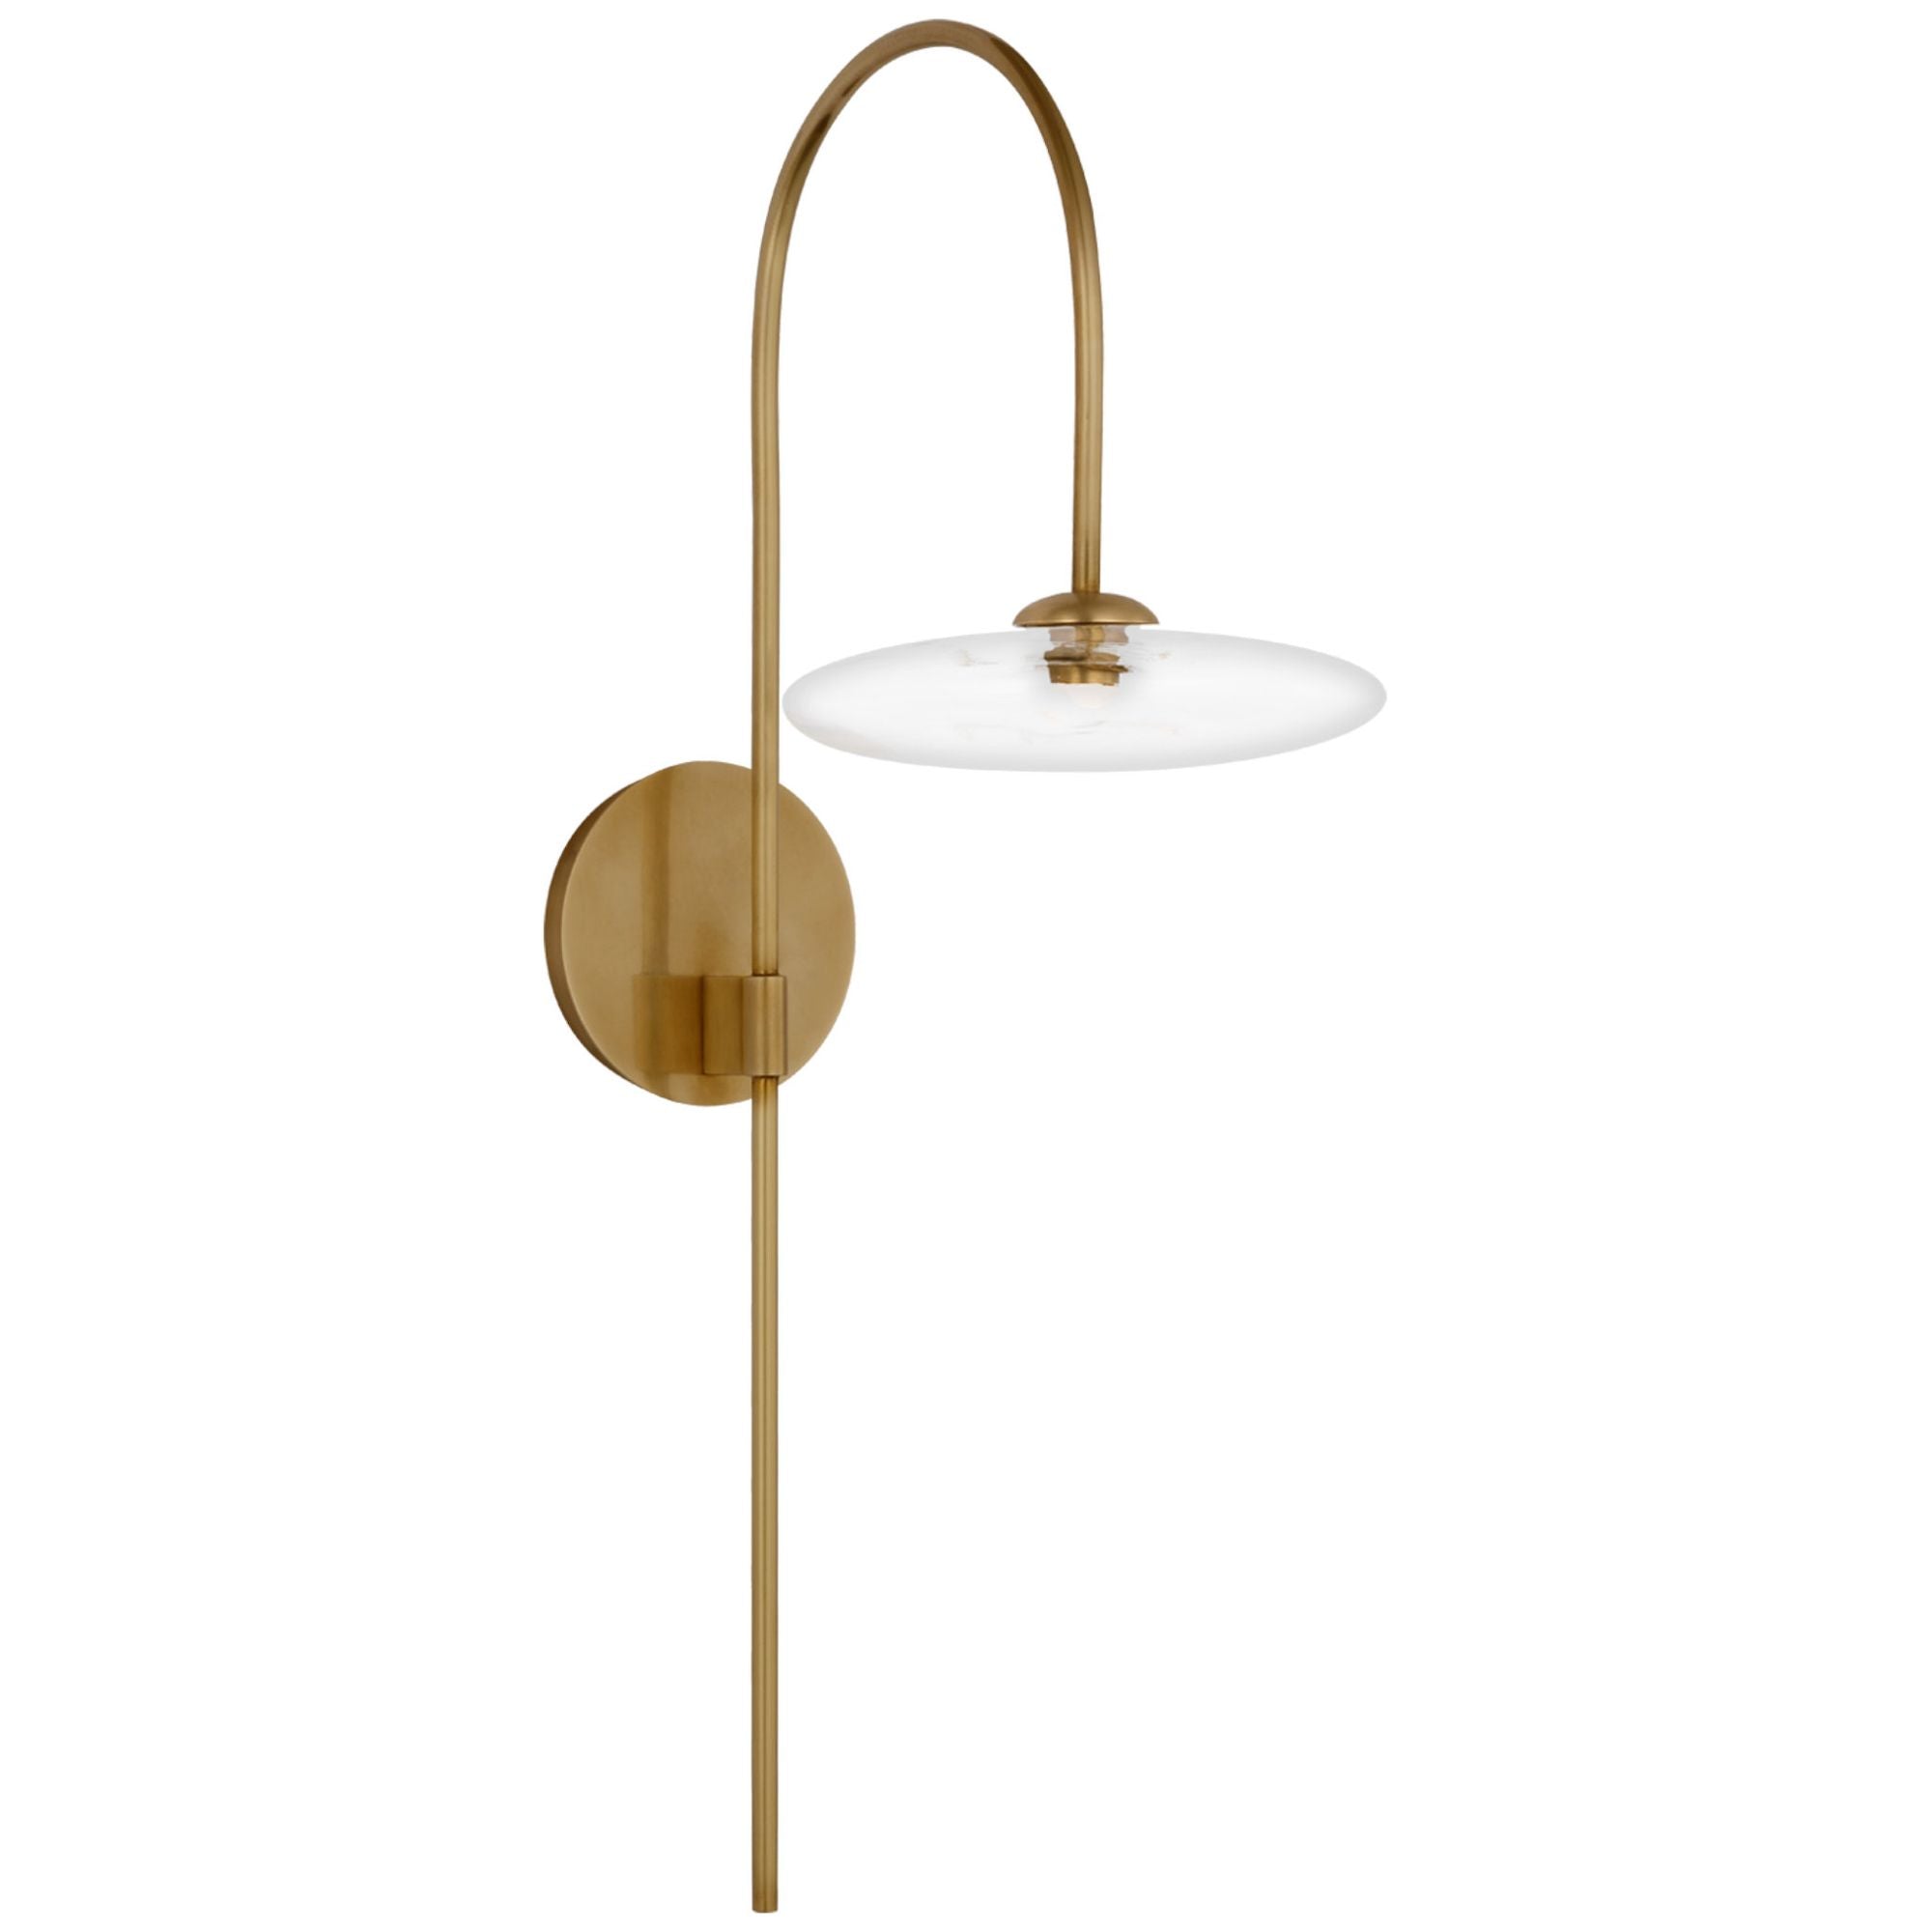 Ian K. Fowler Calvino Arched Single Sconce in Hand-Rubbed Antique Brass with Clear Glass